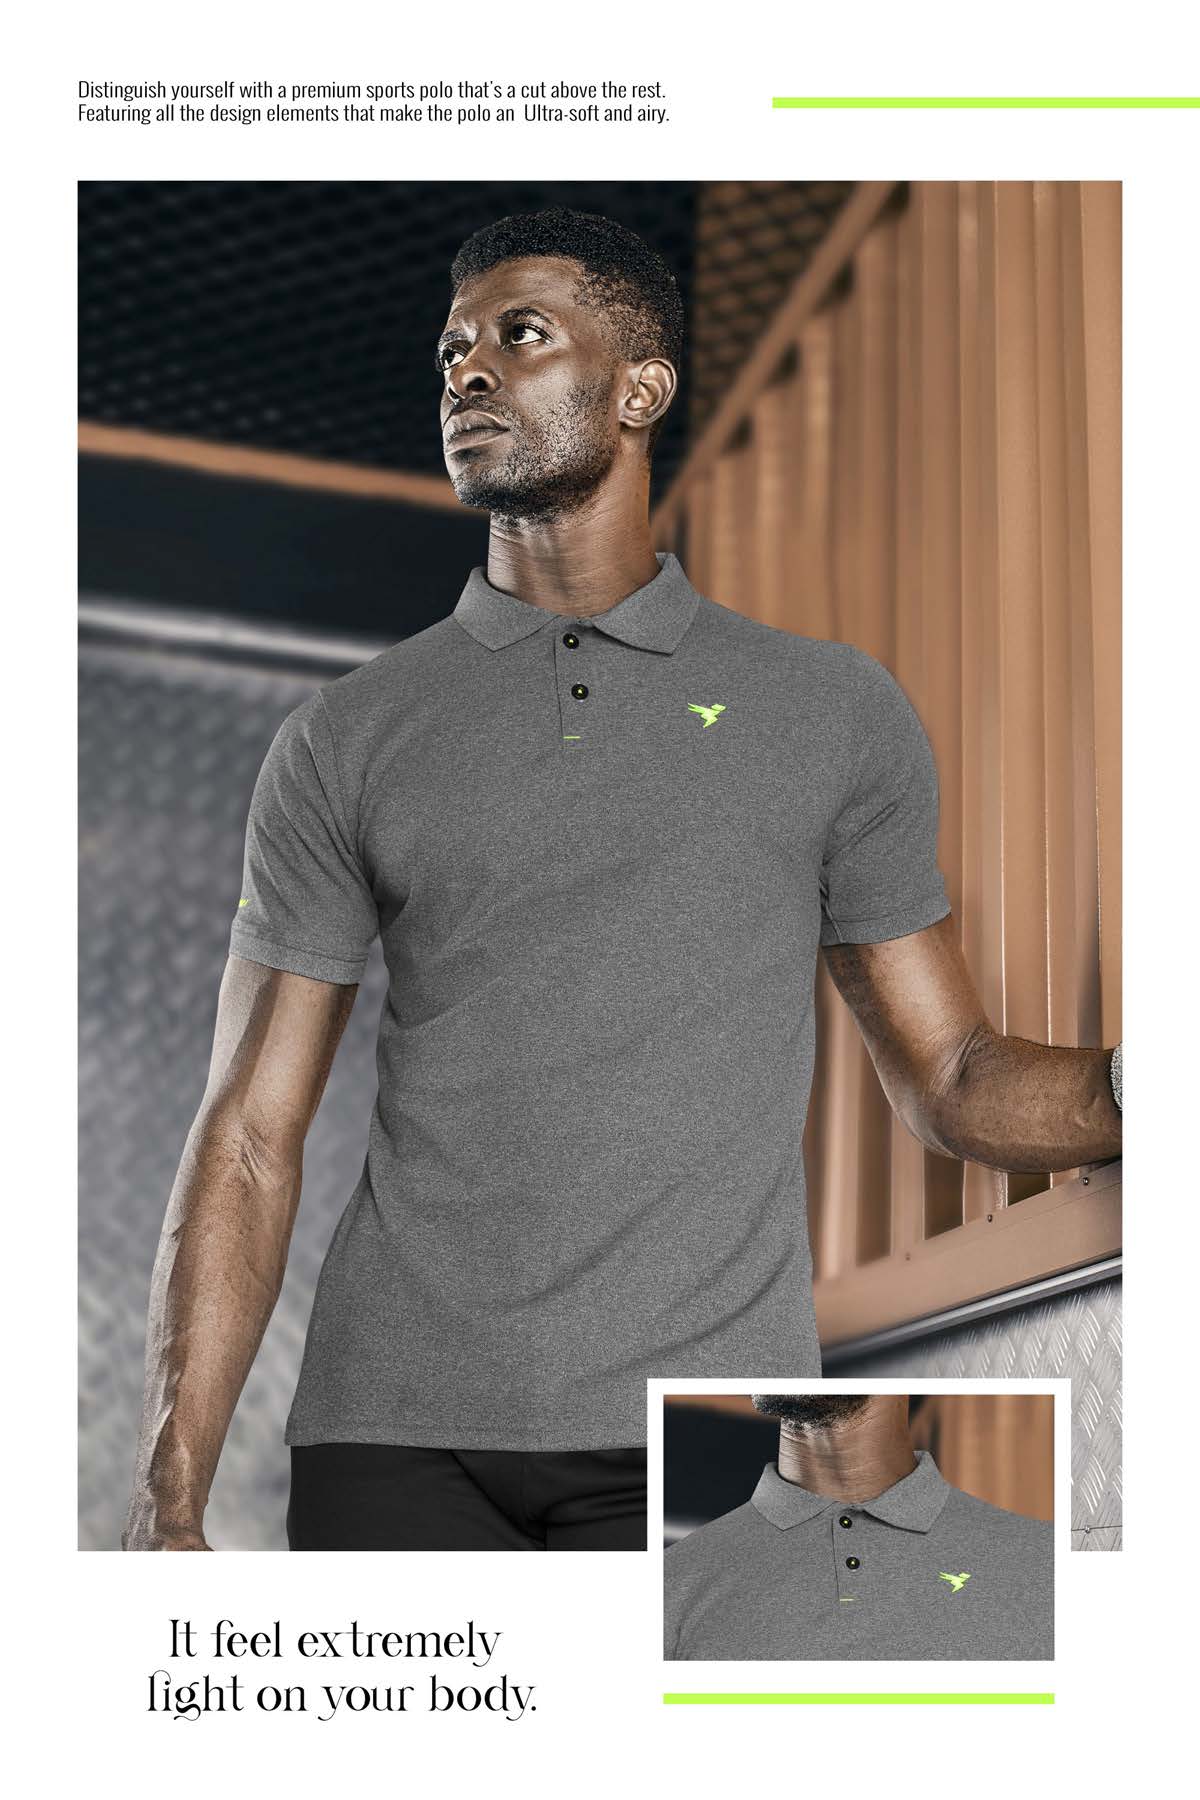 TechnoSport Polo Neck Half Sleeve Dry Fit T Shirt for Men OR-21 (Grey)